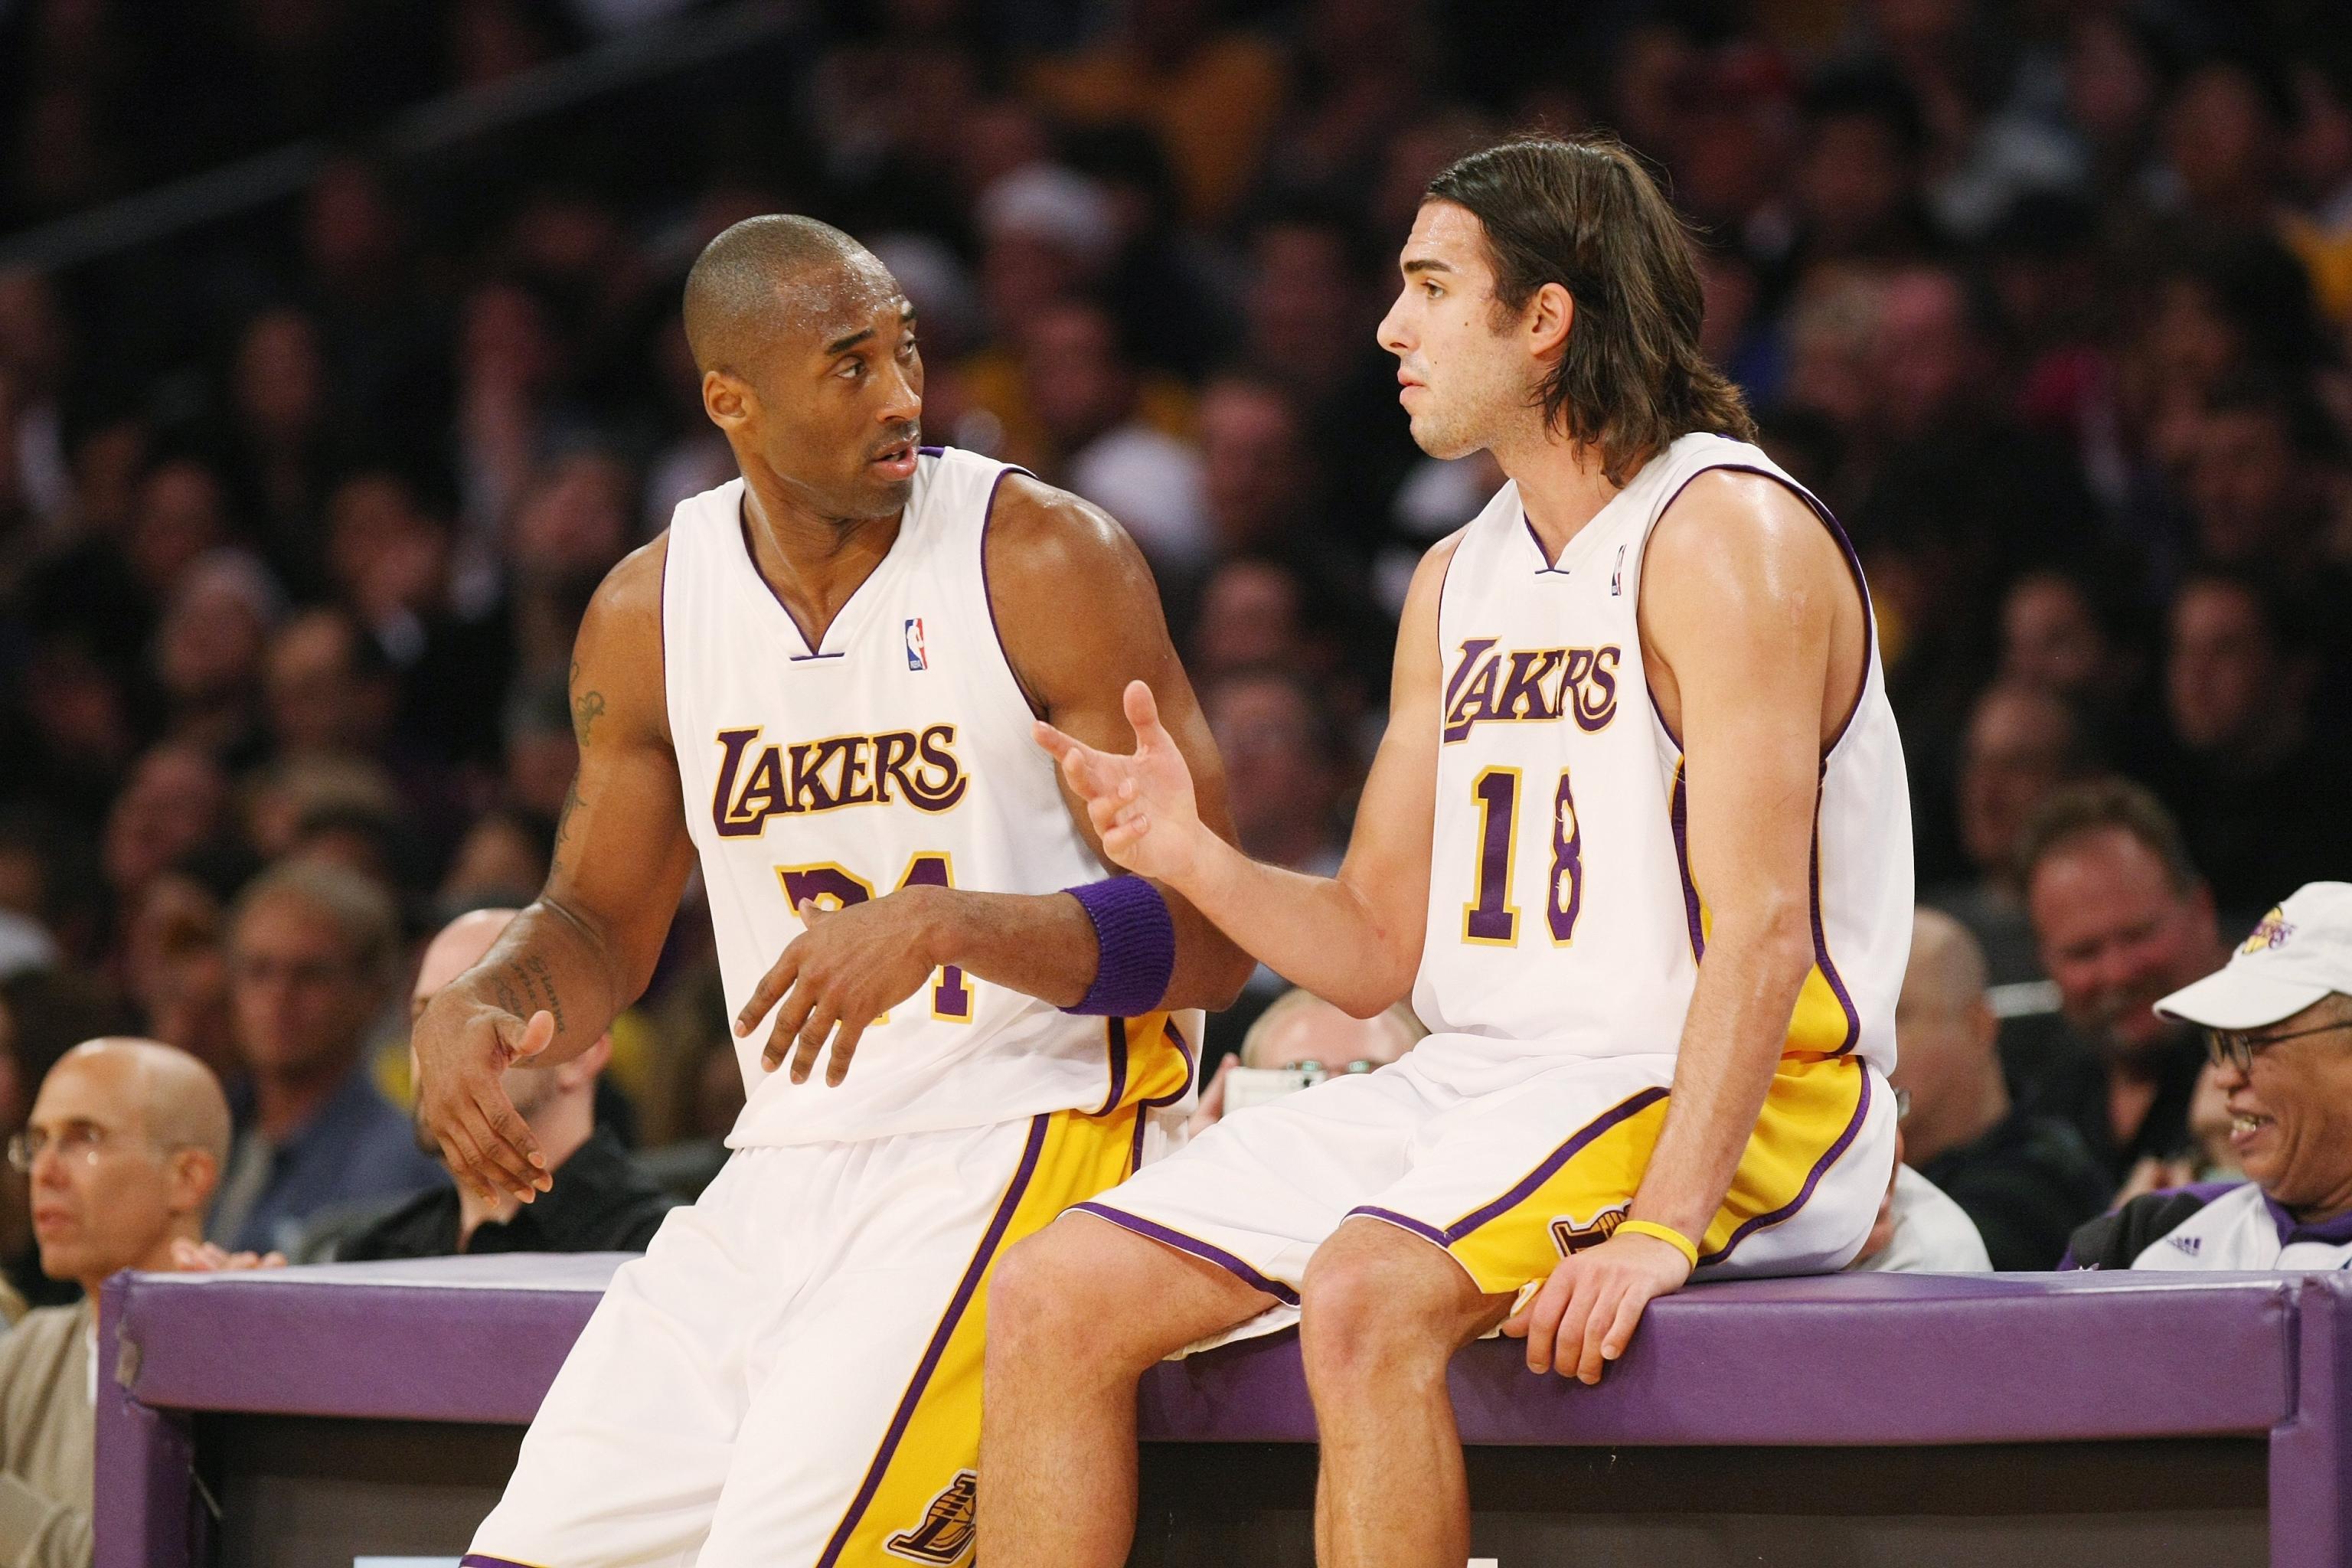 Arash Markazi on X: I asked the Lakers what's up with their gold